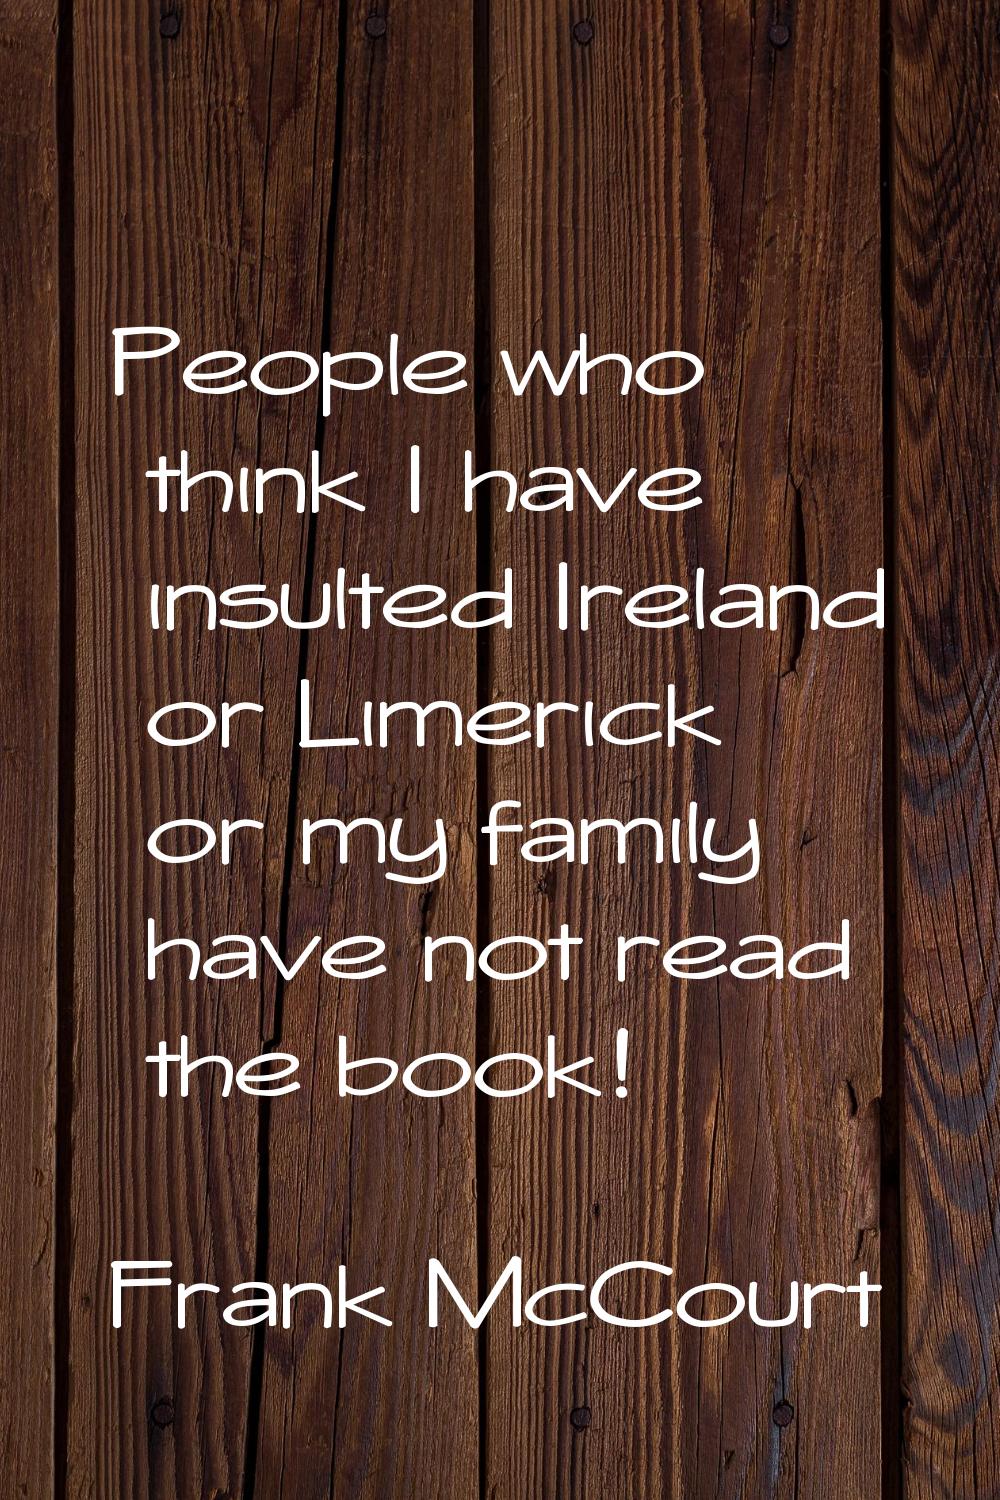 People who think I have insulted Ireland or Limerick or my family have not read the book!